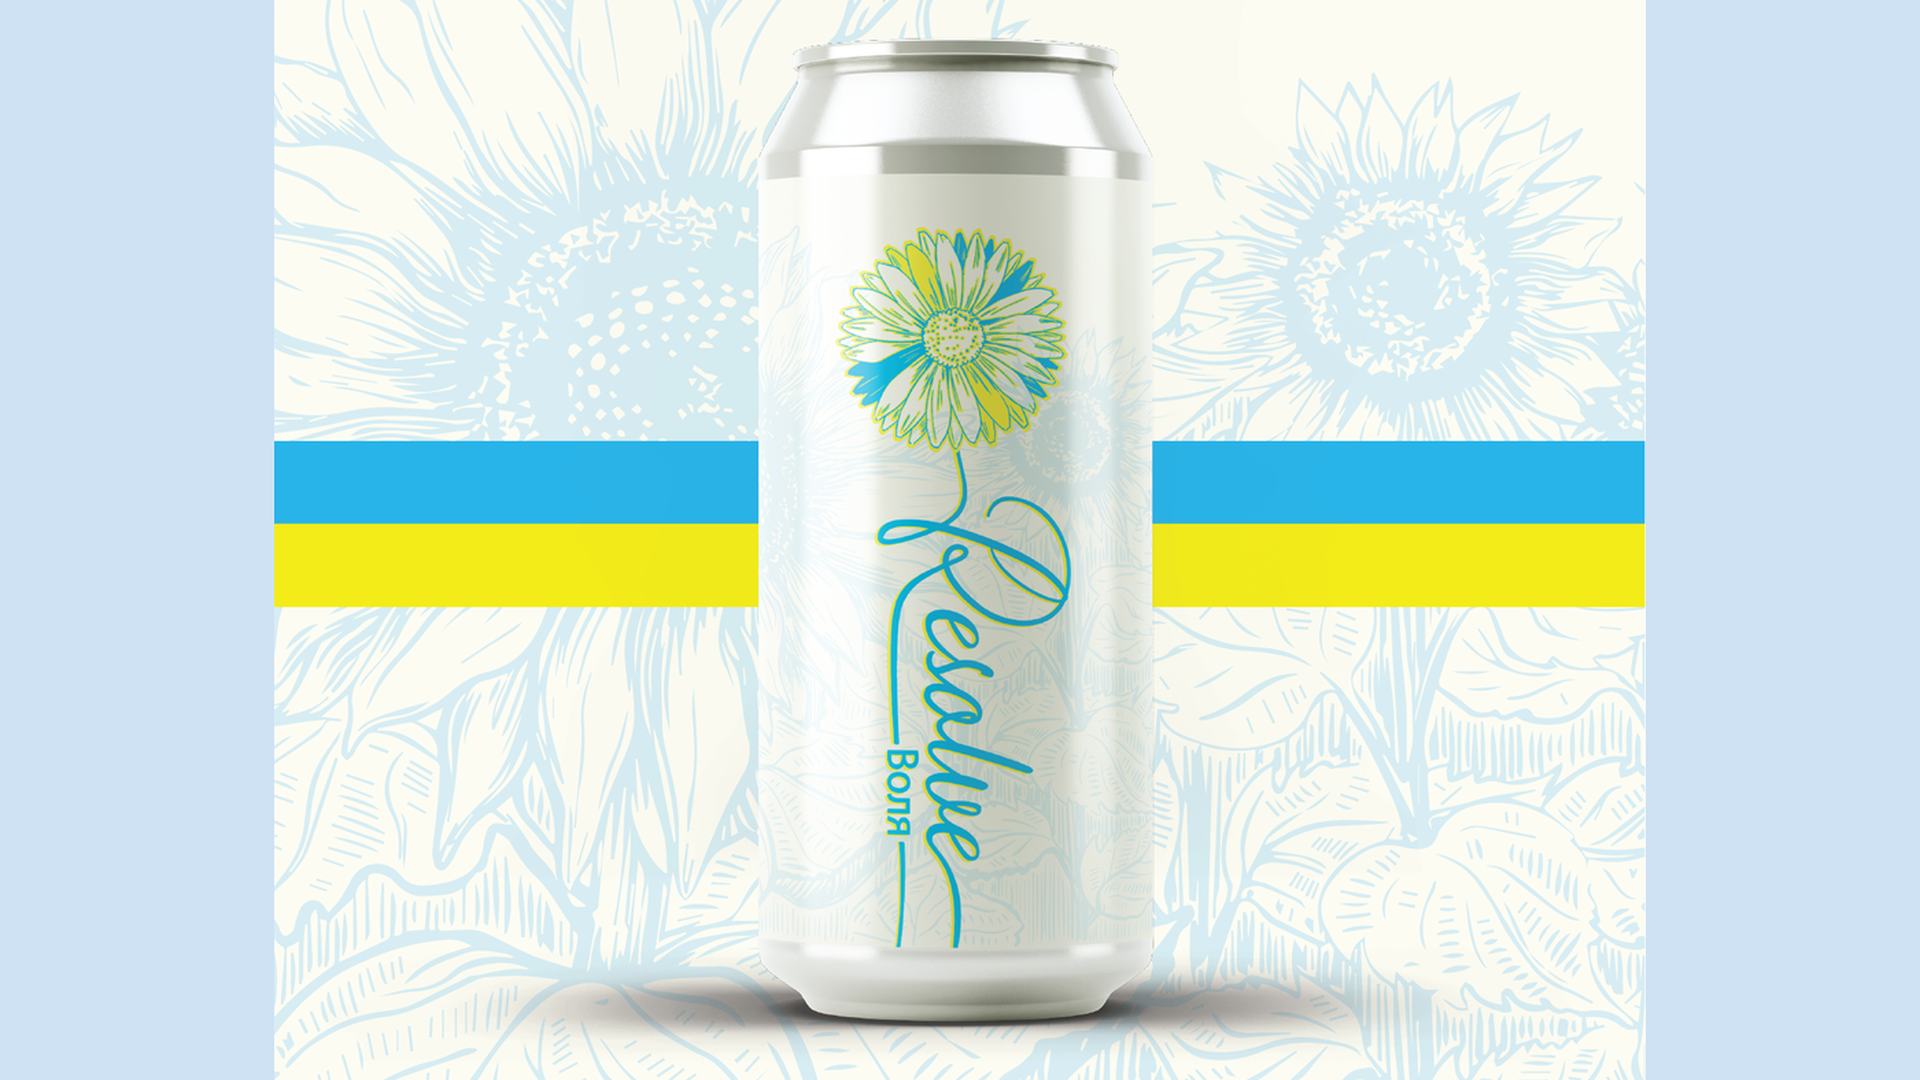 Resolve Beer featuring a blue and yellow sunflower on its label